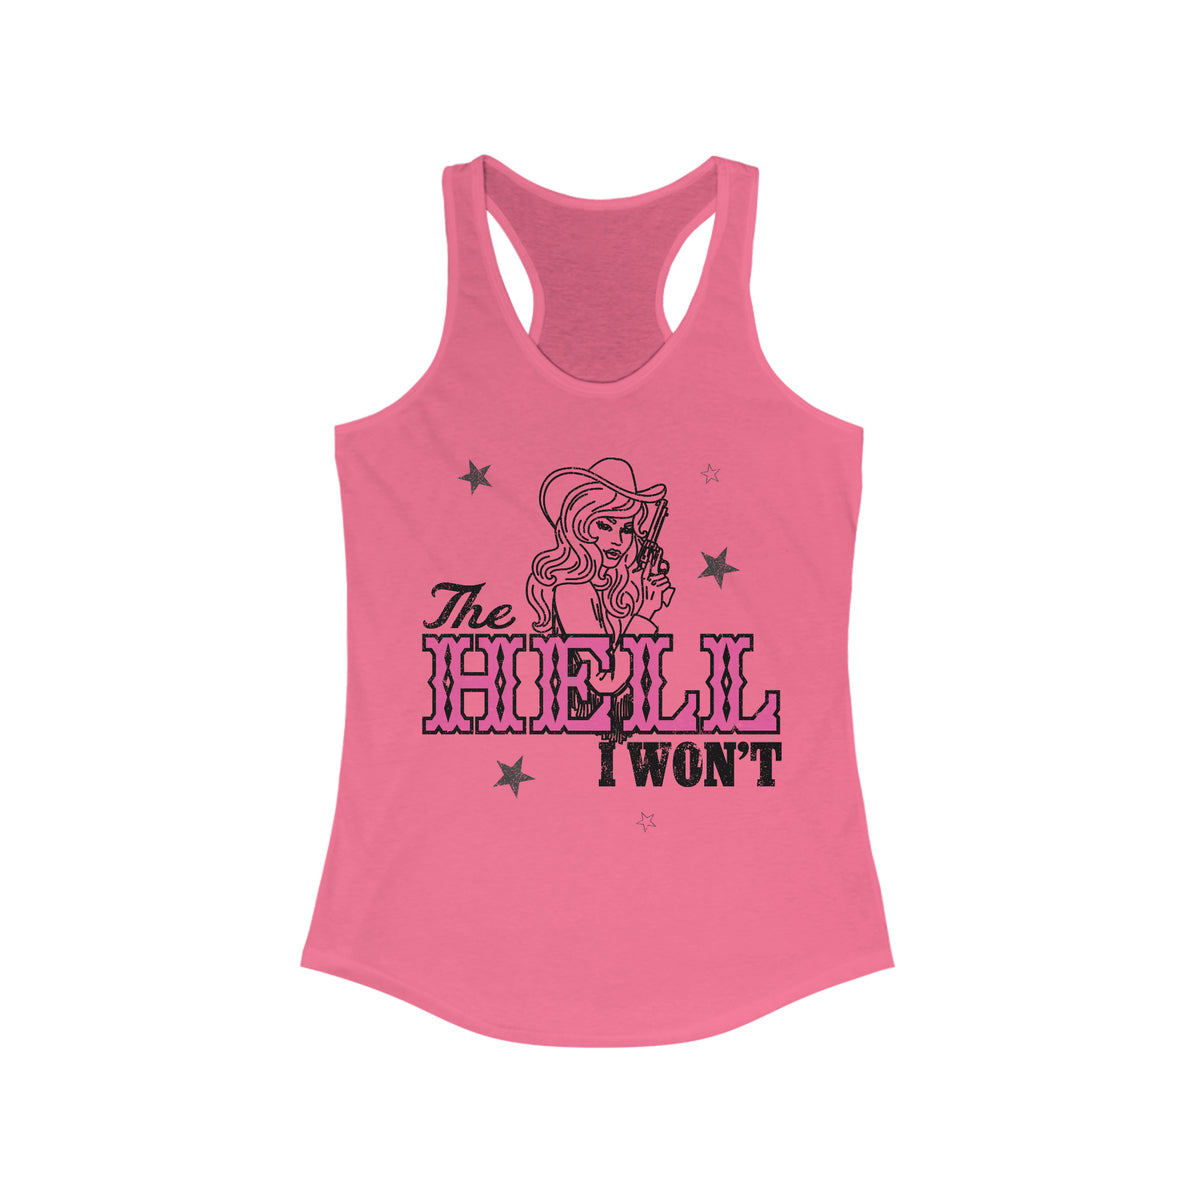 The Hell I won't Tank Top | Country Graphic Tee Tank | Women's Western Tank Tops